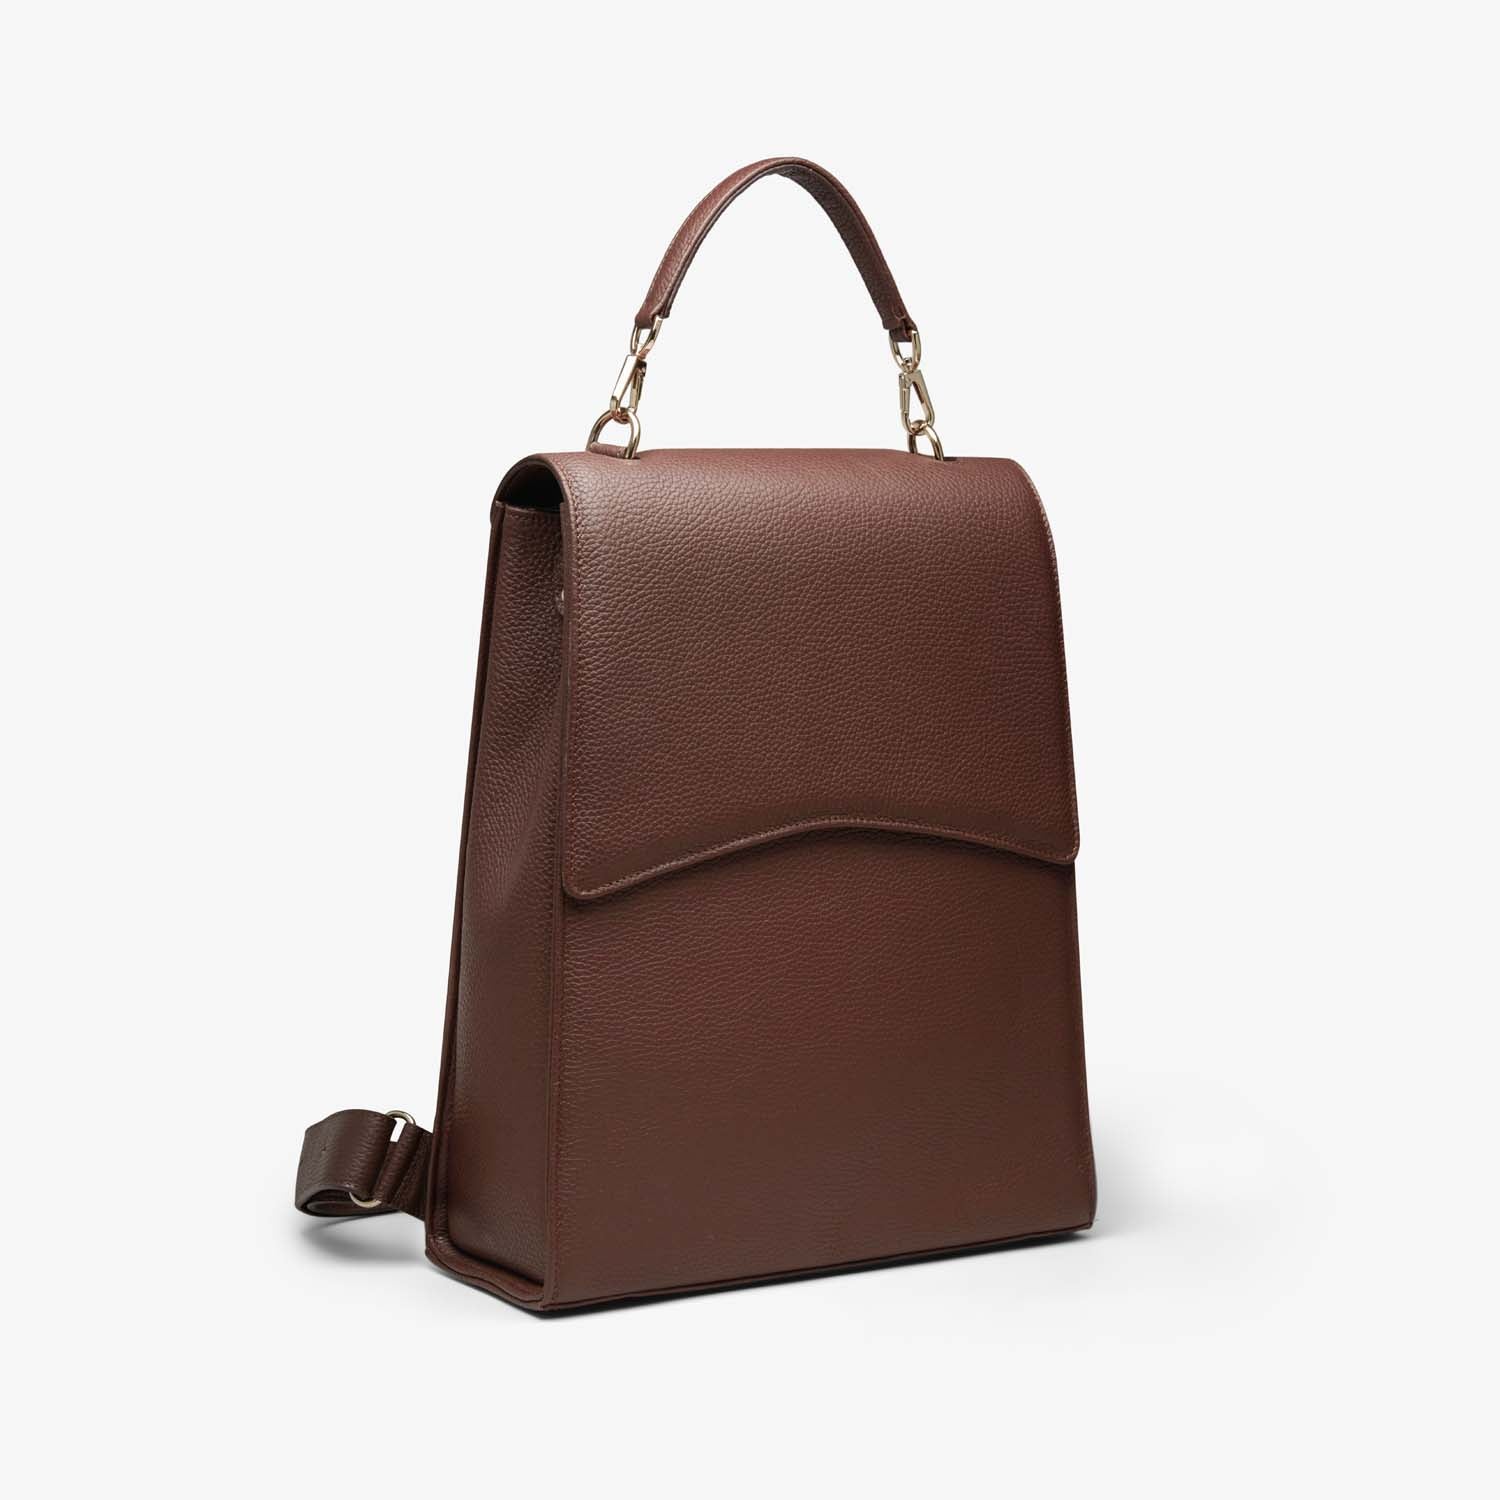 A dark brown grained leather backpack with light gold metalware. It has a detachable top handle and adjustable shoulder straps. It fits your laptop and other daily essentials.